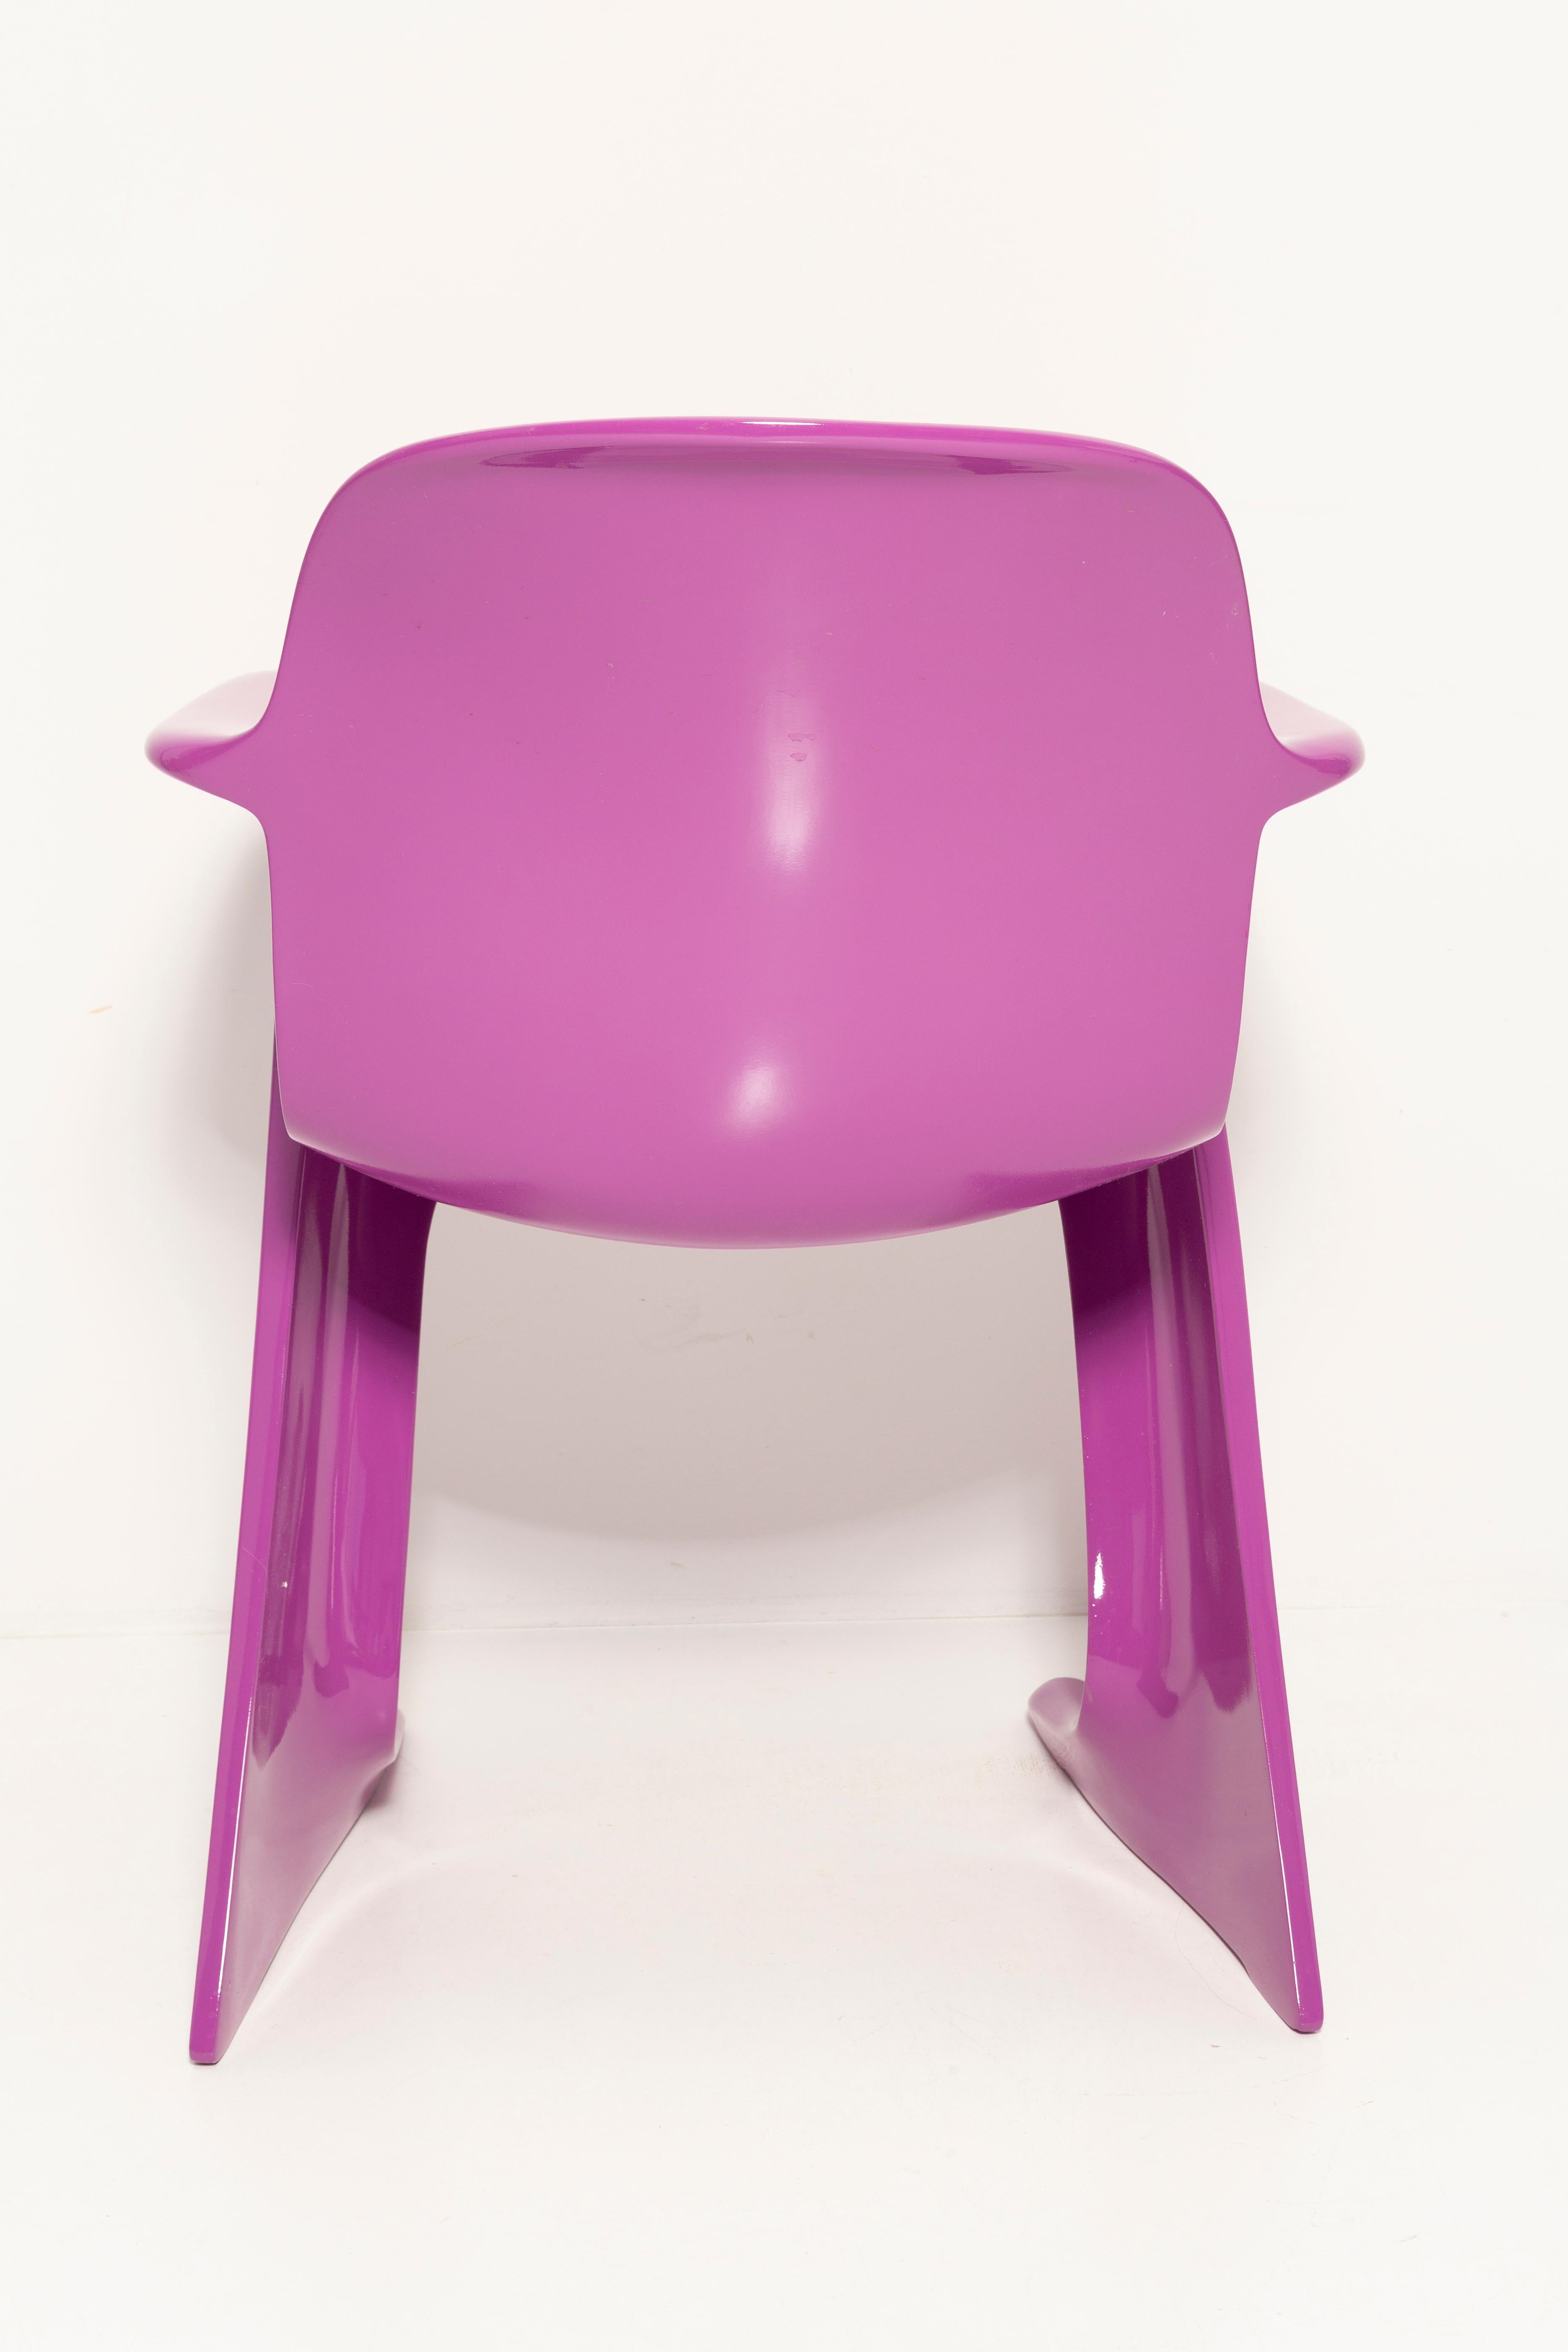 Mid-Century Violet Purple Kangaroo Chair Designed by Ernst Moeckl, Germany, 1968 For Sale 3